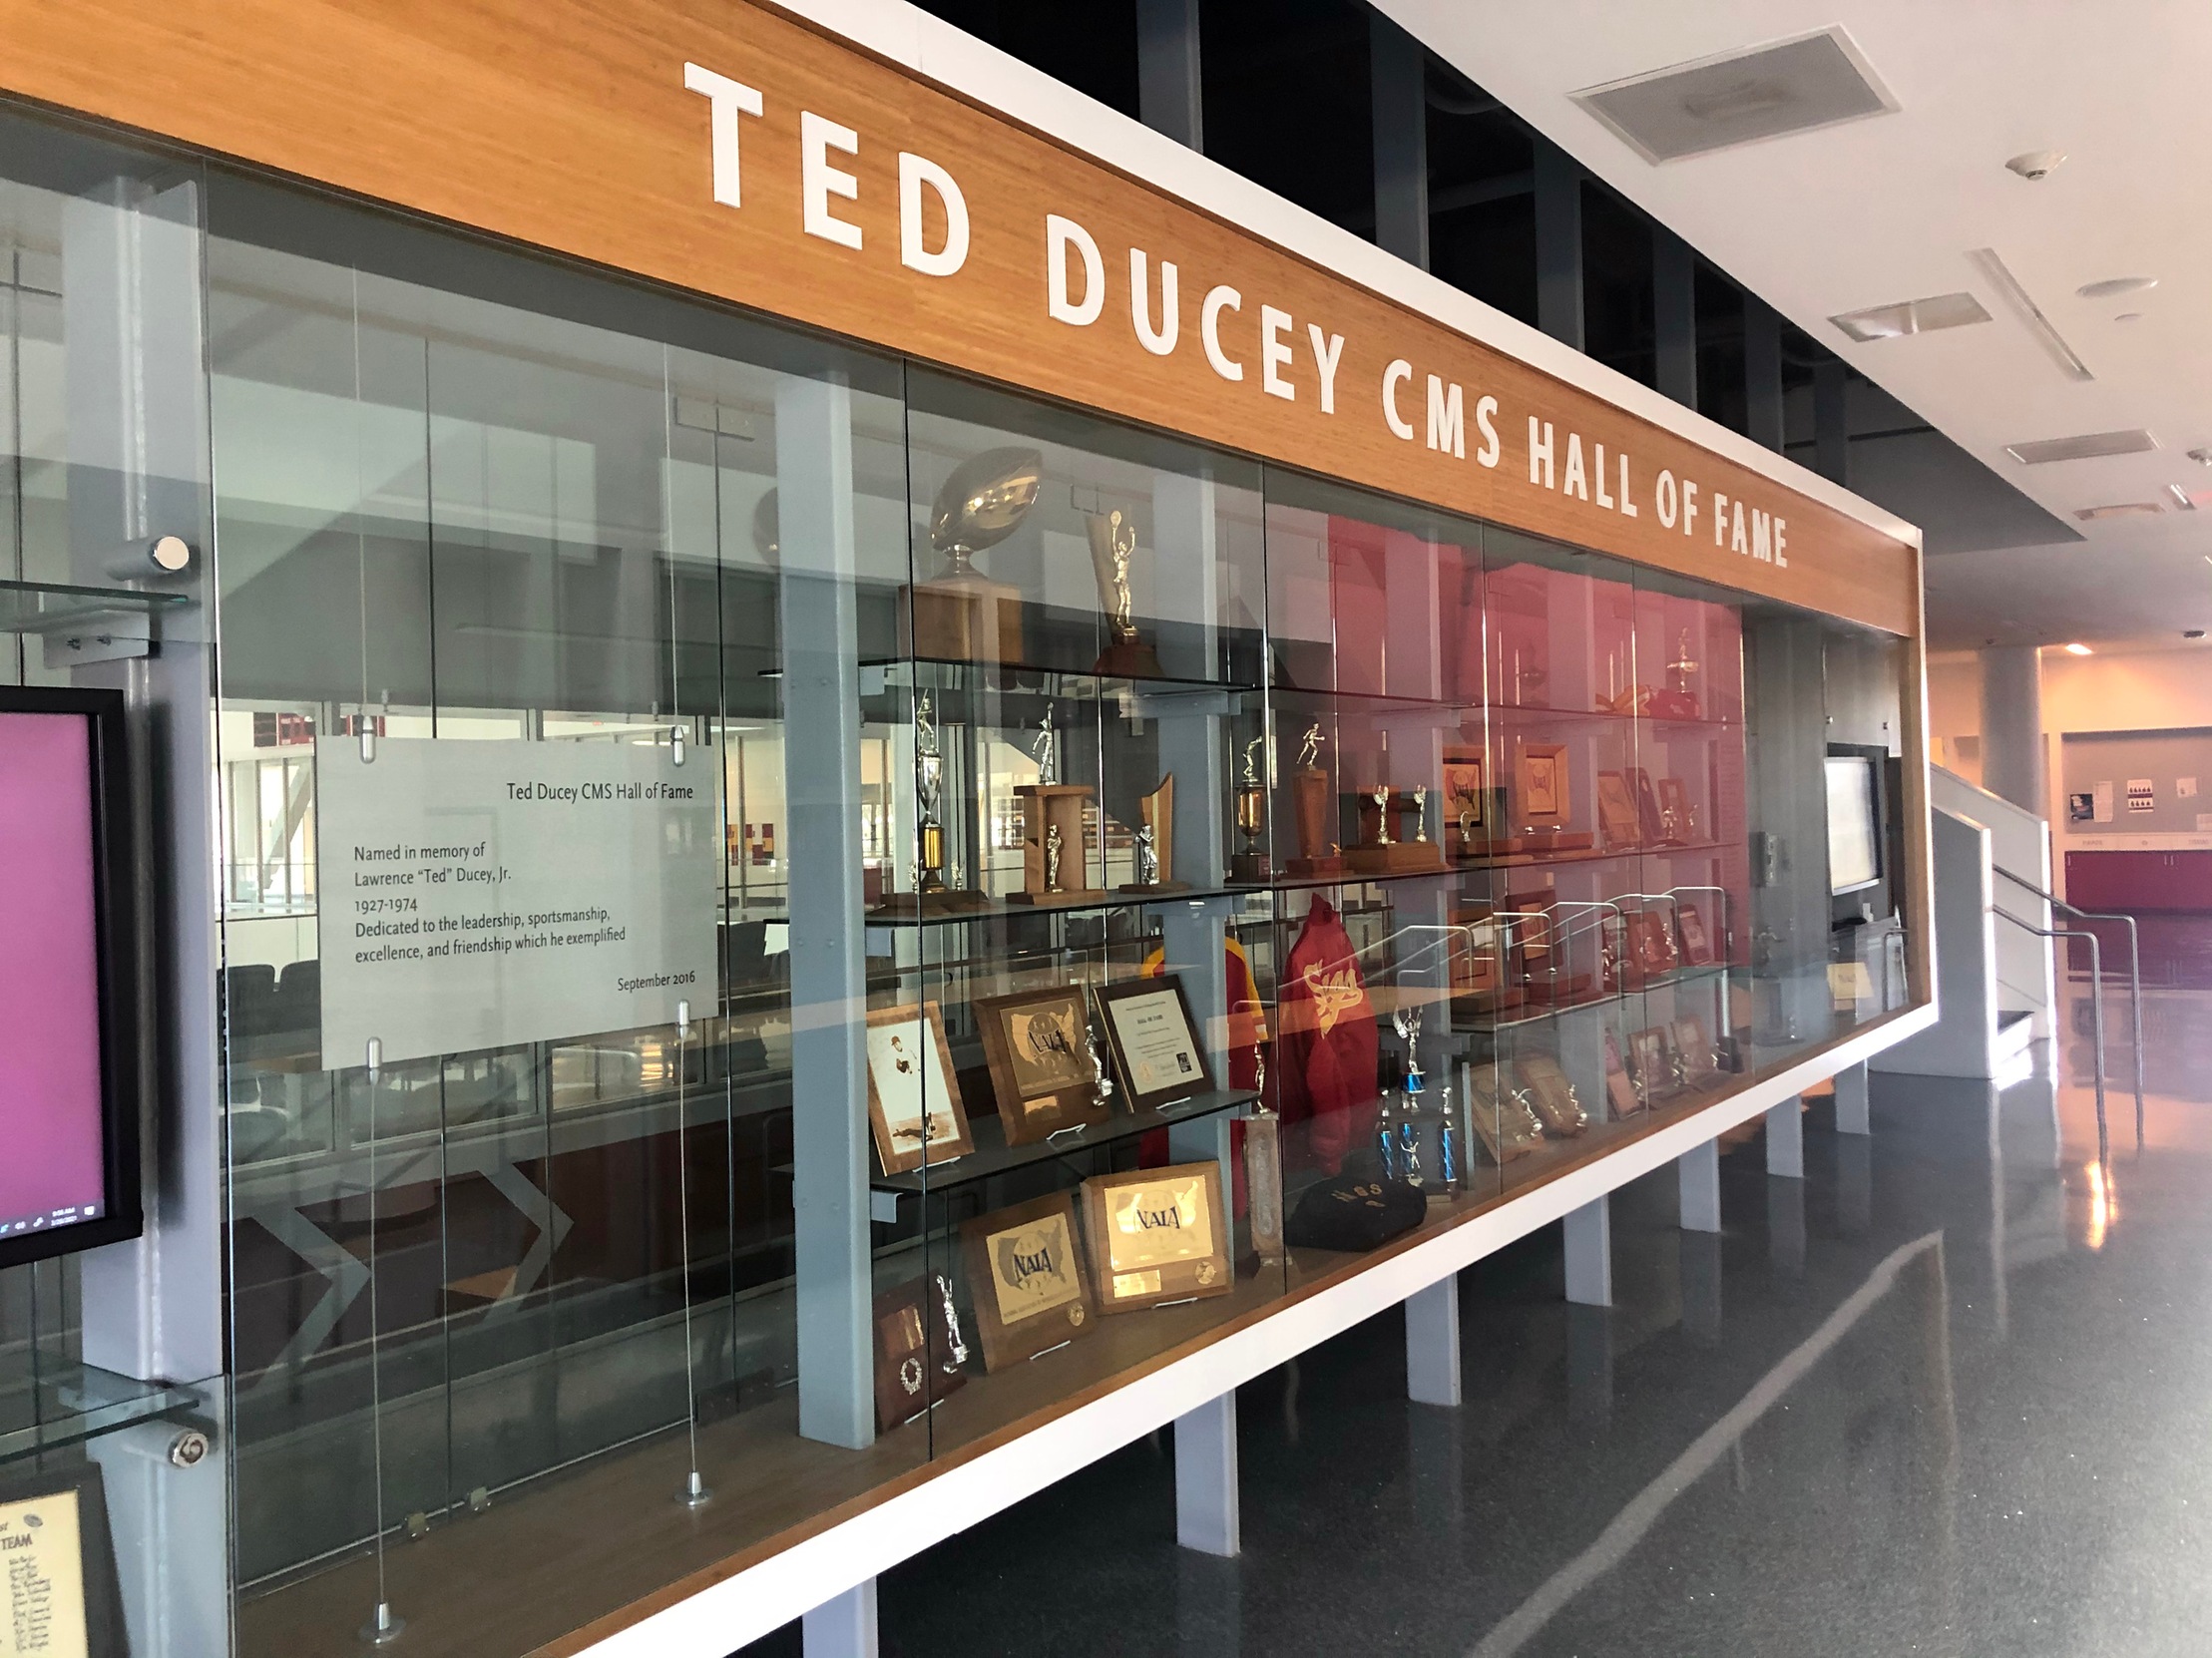 The current Ted Ducey Hall of Fame in Roberts Pavilion